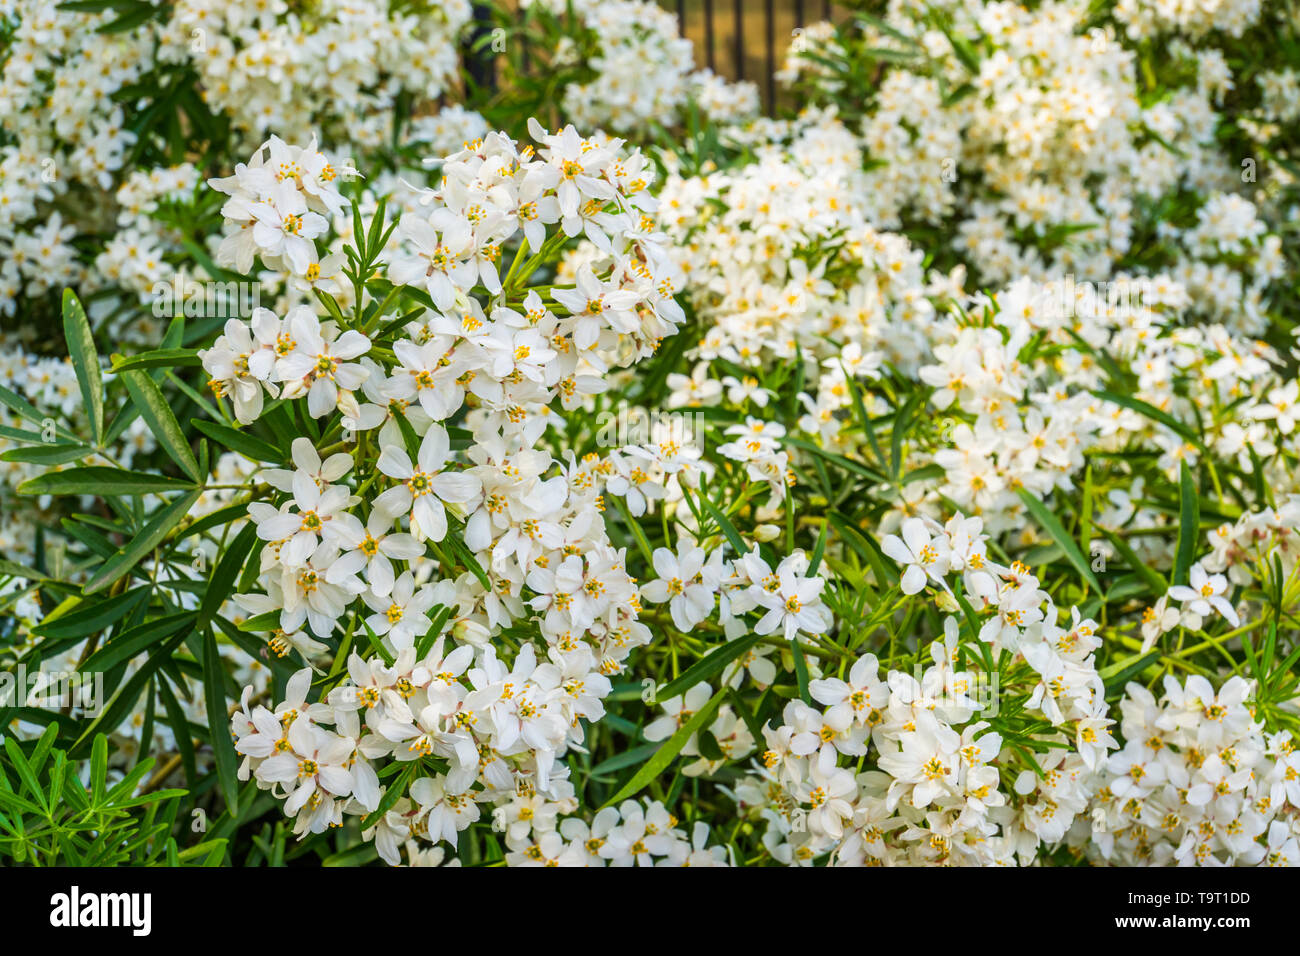 Bush of mexican orange blossom flowers, white aromatic flowering plant from mexico, popular tropical cultivated plant Stock Photo